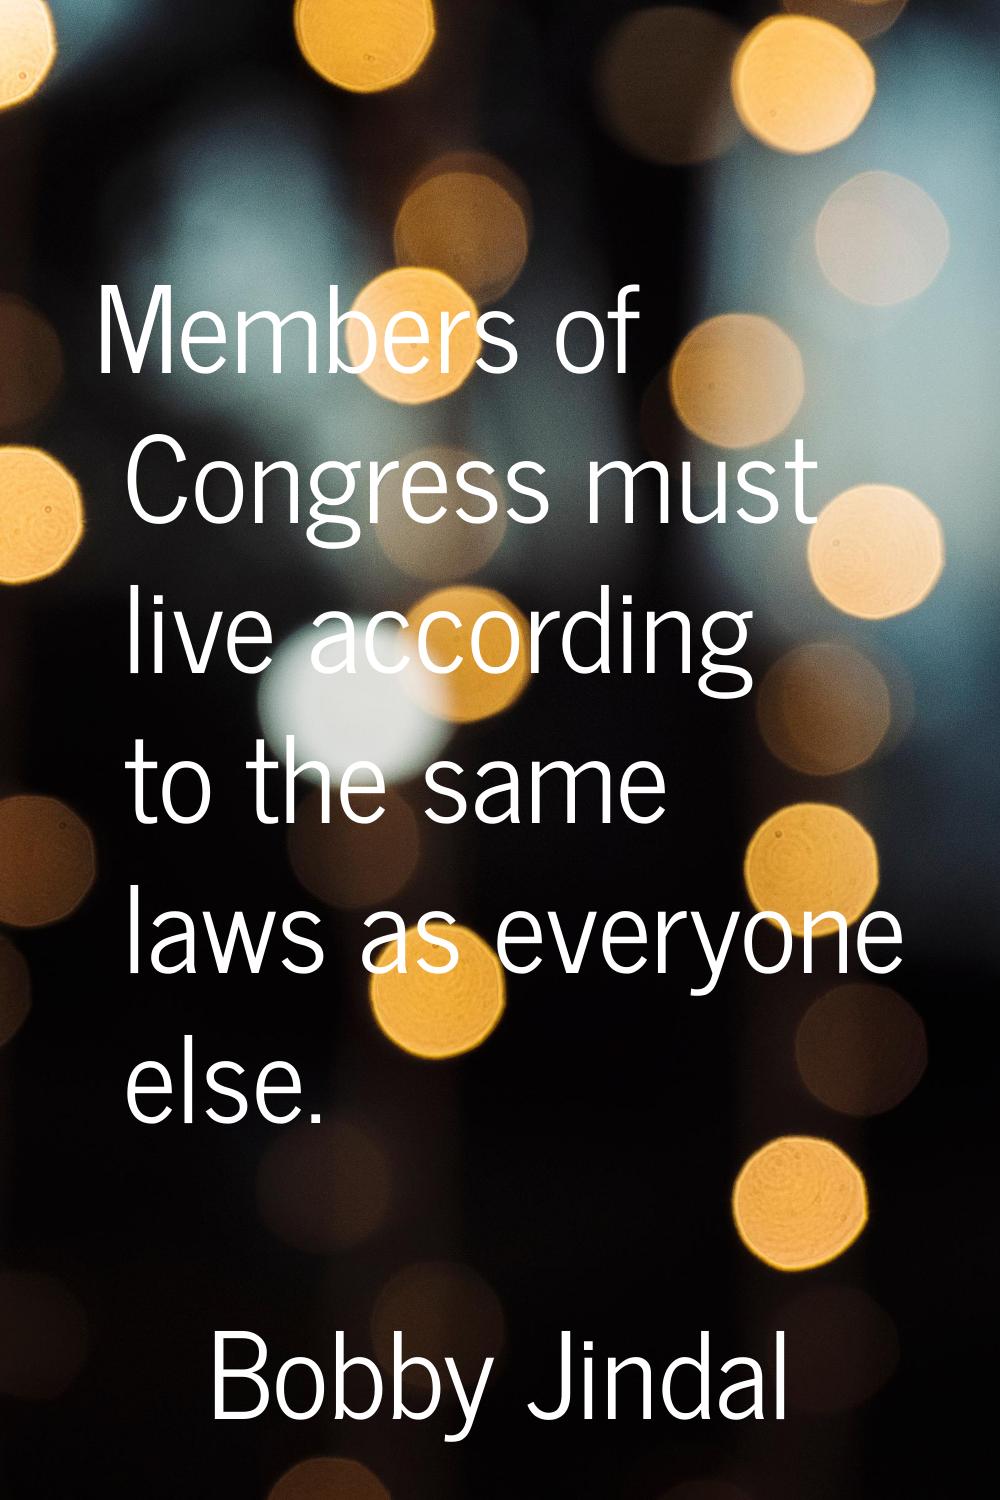 Members of Congress must live according to the same laws as everyone else.